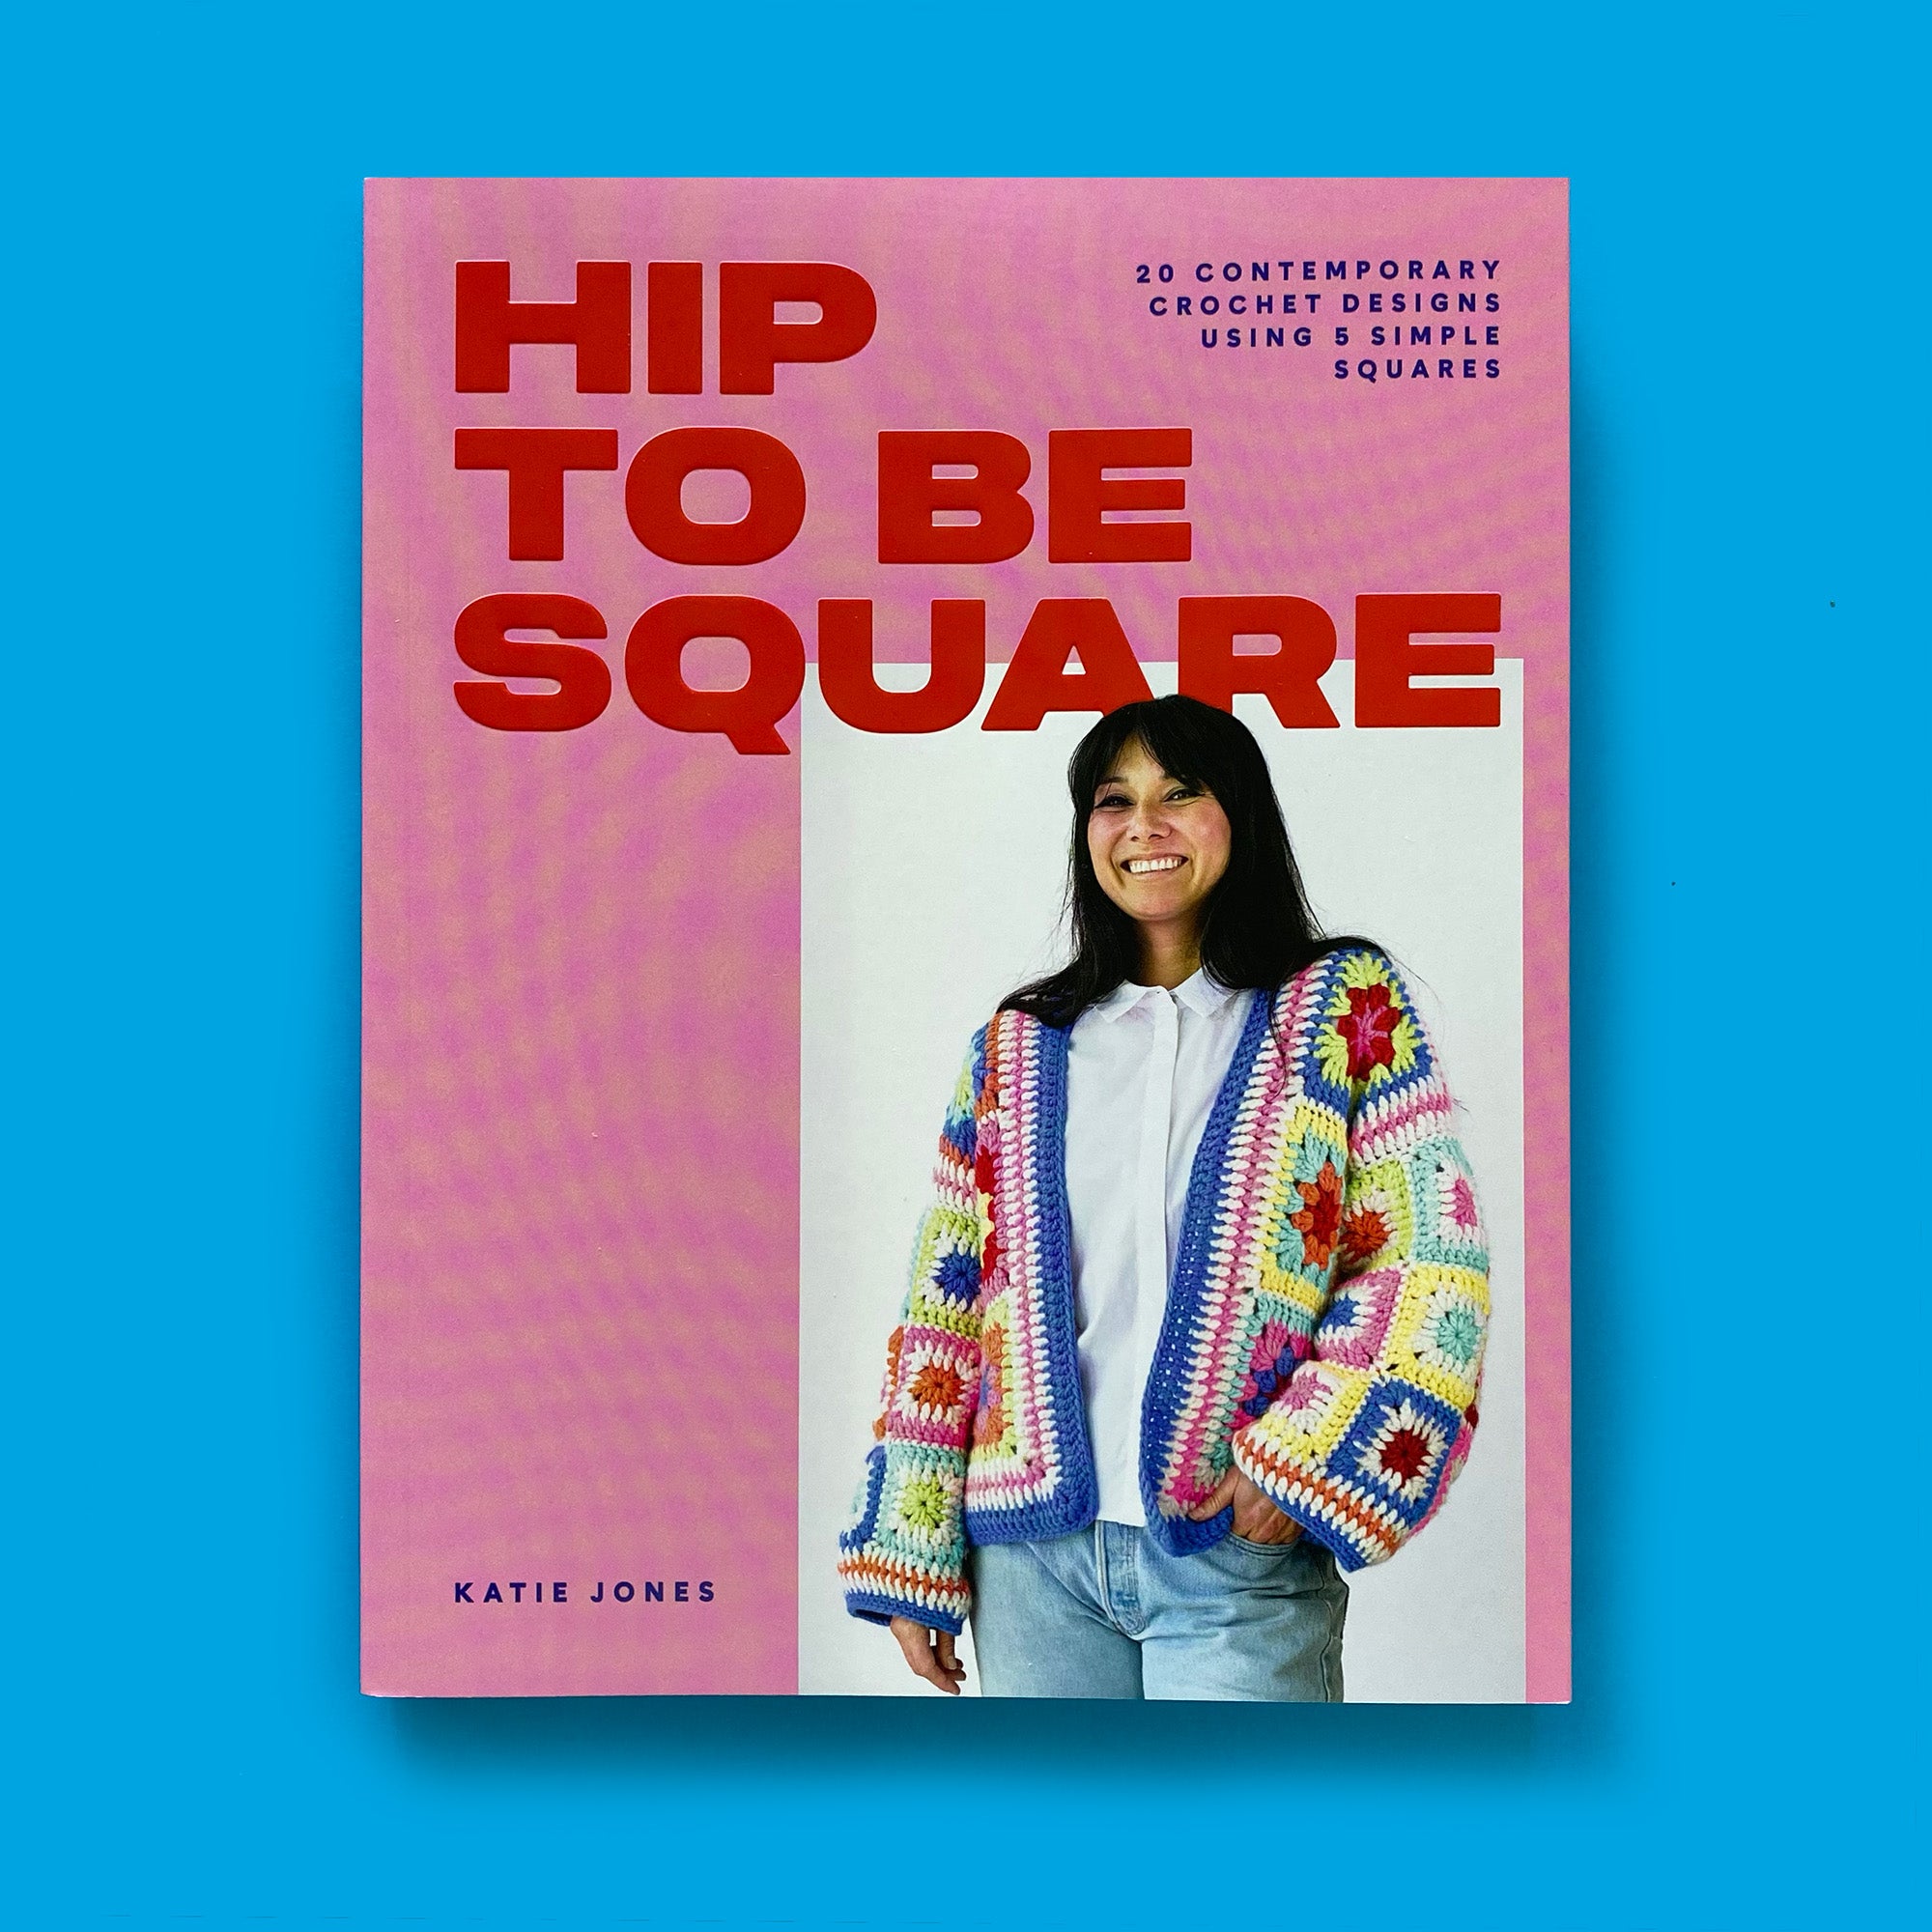 Hip to Be Square Crochet Kit: ADHD Product Recommendations